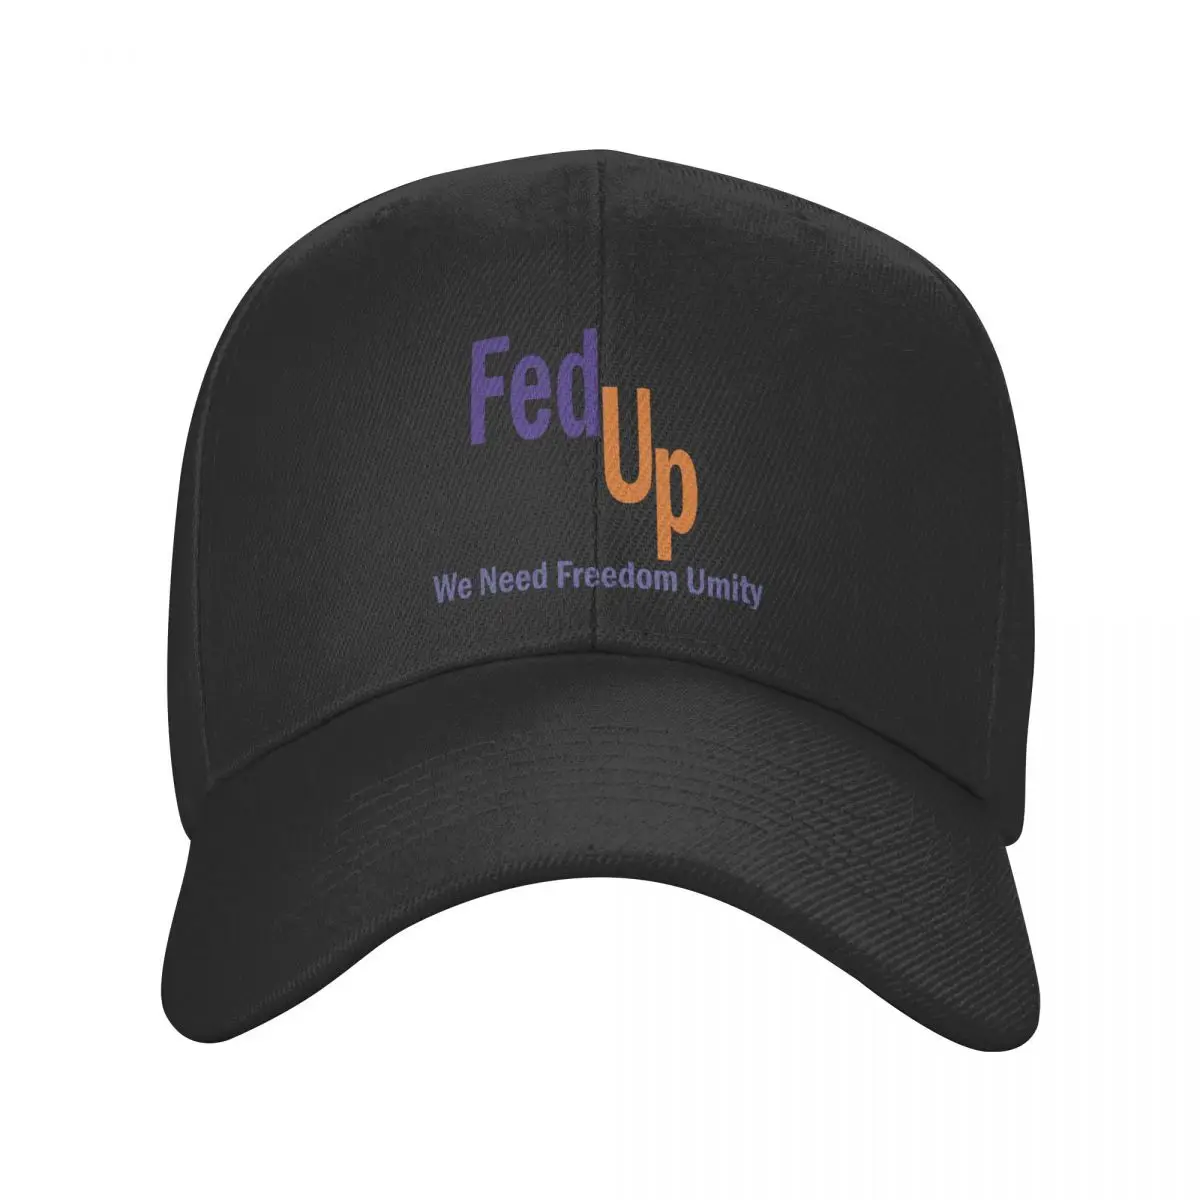 

Fed Up We Need Freedom And Unity Baseball Cap Adult Fashion Trucker Hat Official FedUp Dad Hat Adjustable Snapback Sports Cap